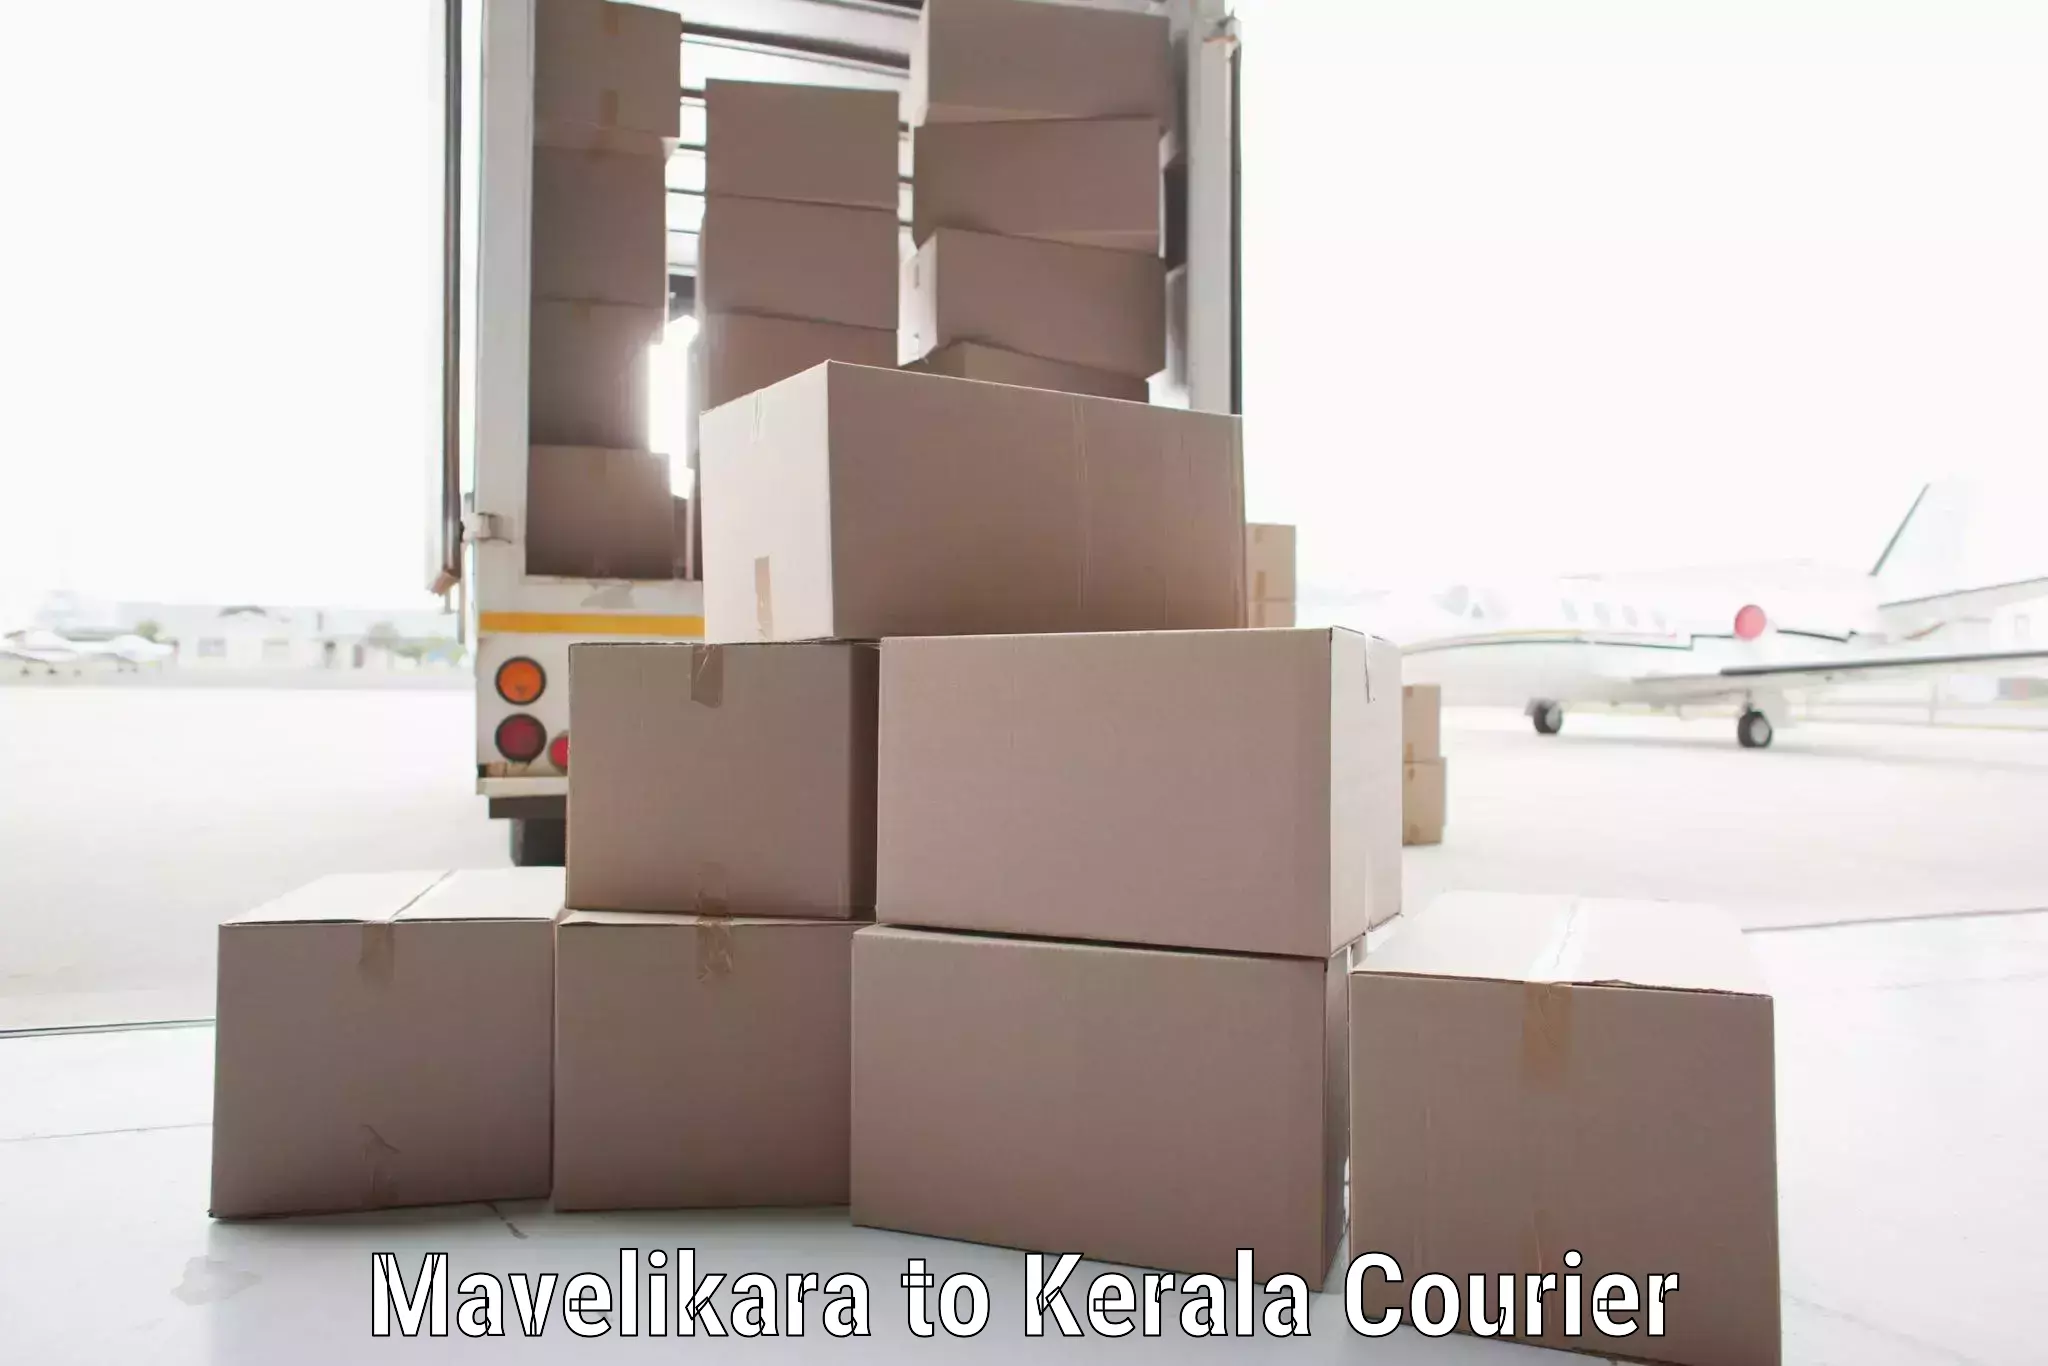 Automated shipping processes Mavelikara to Thrissur